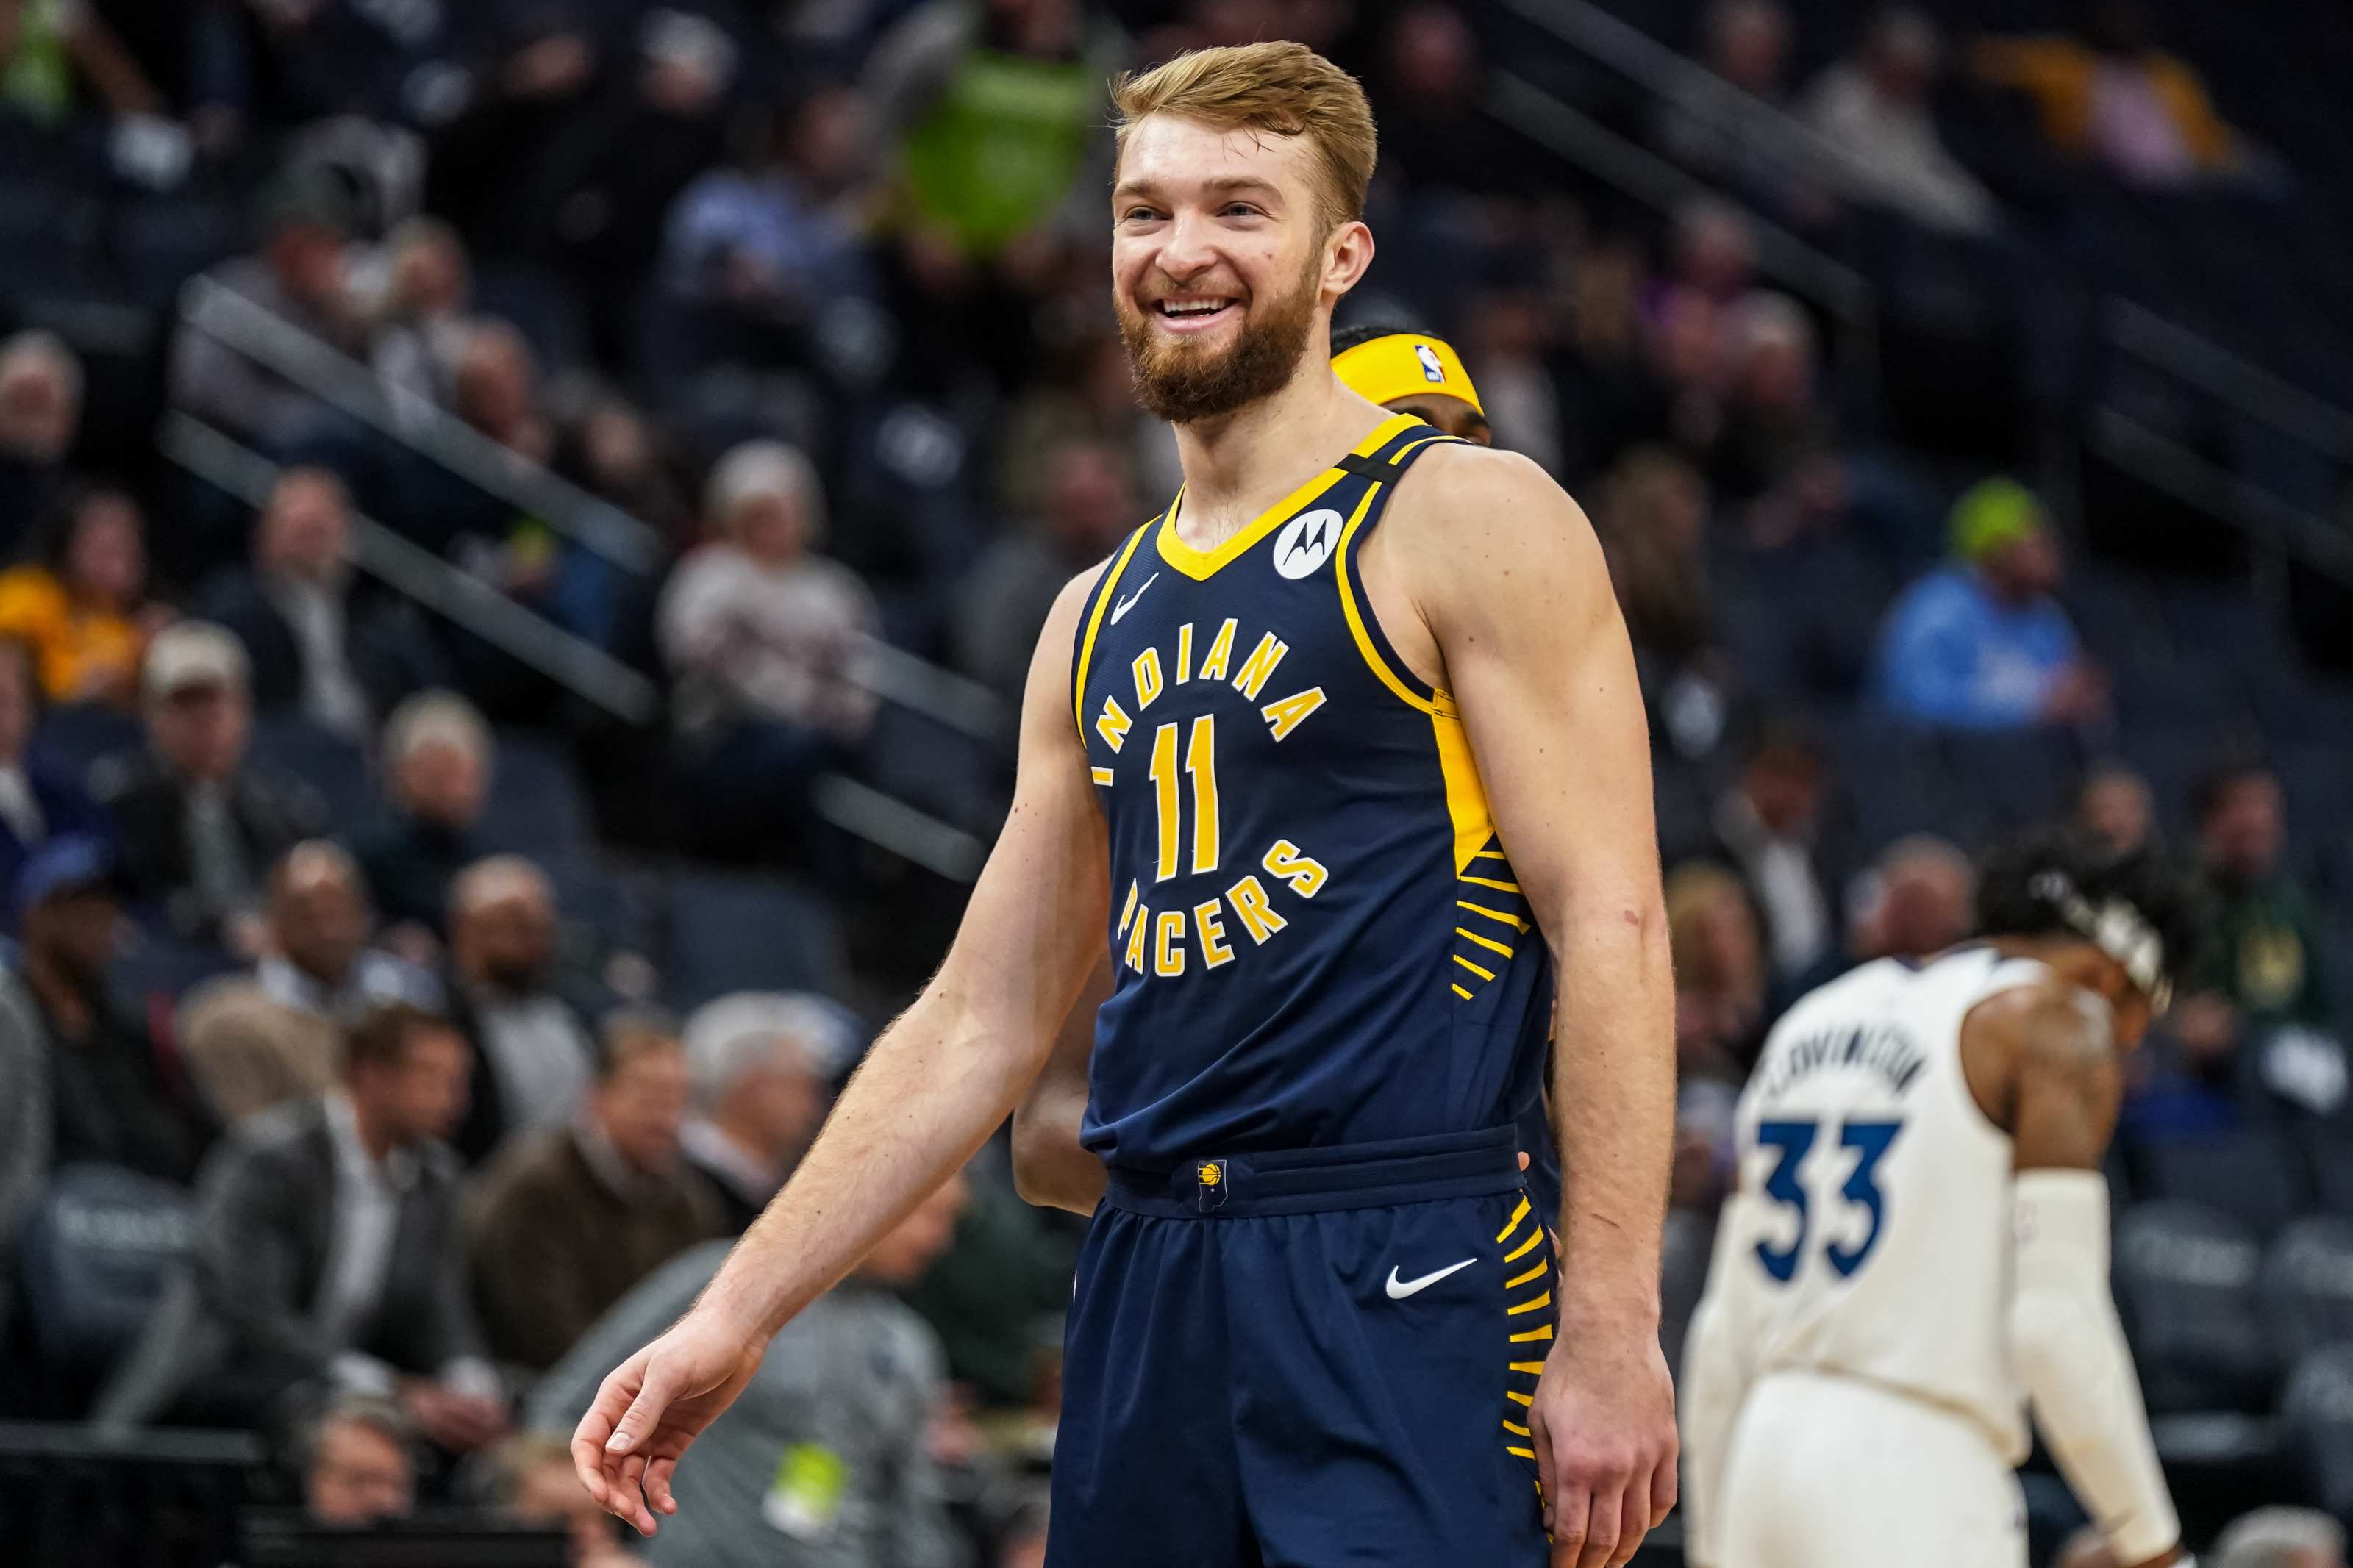 Better late than never: NBA names Sabonis an All-Star reserve